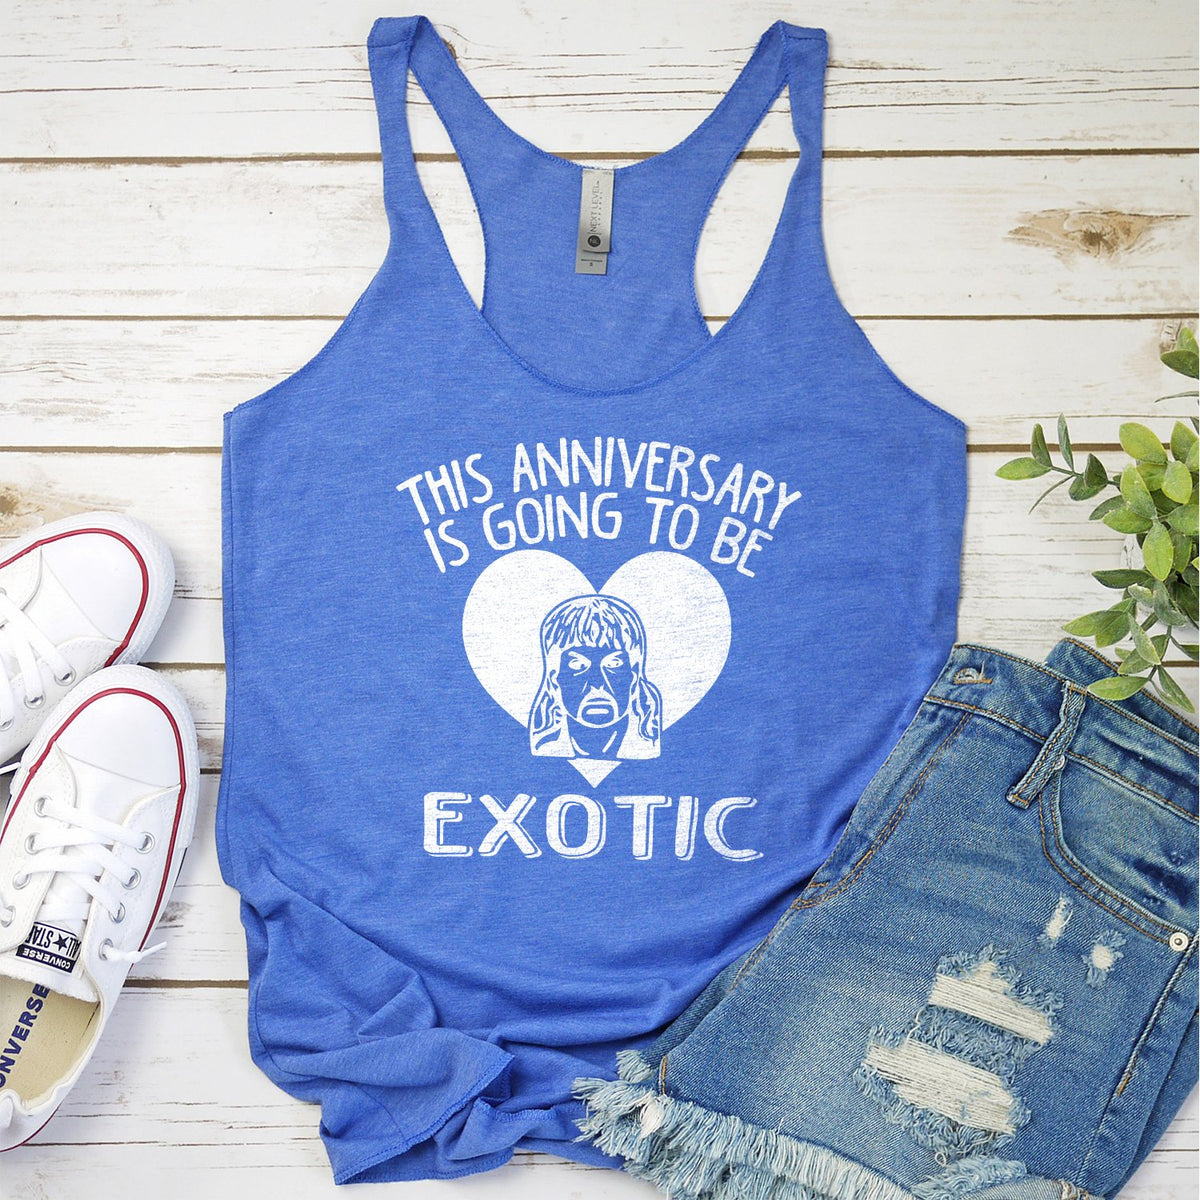 This Anniversary is Going To Be Exotic - Tank Top Racerback